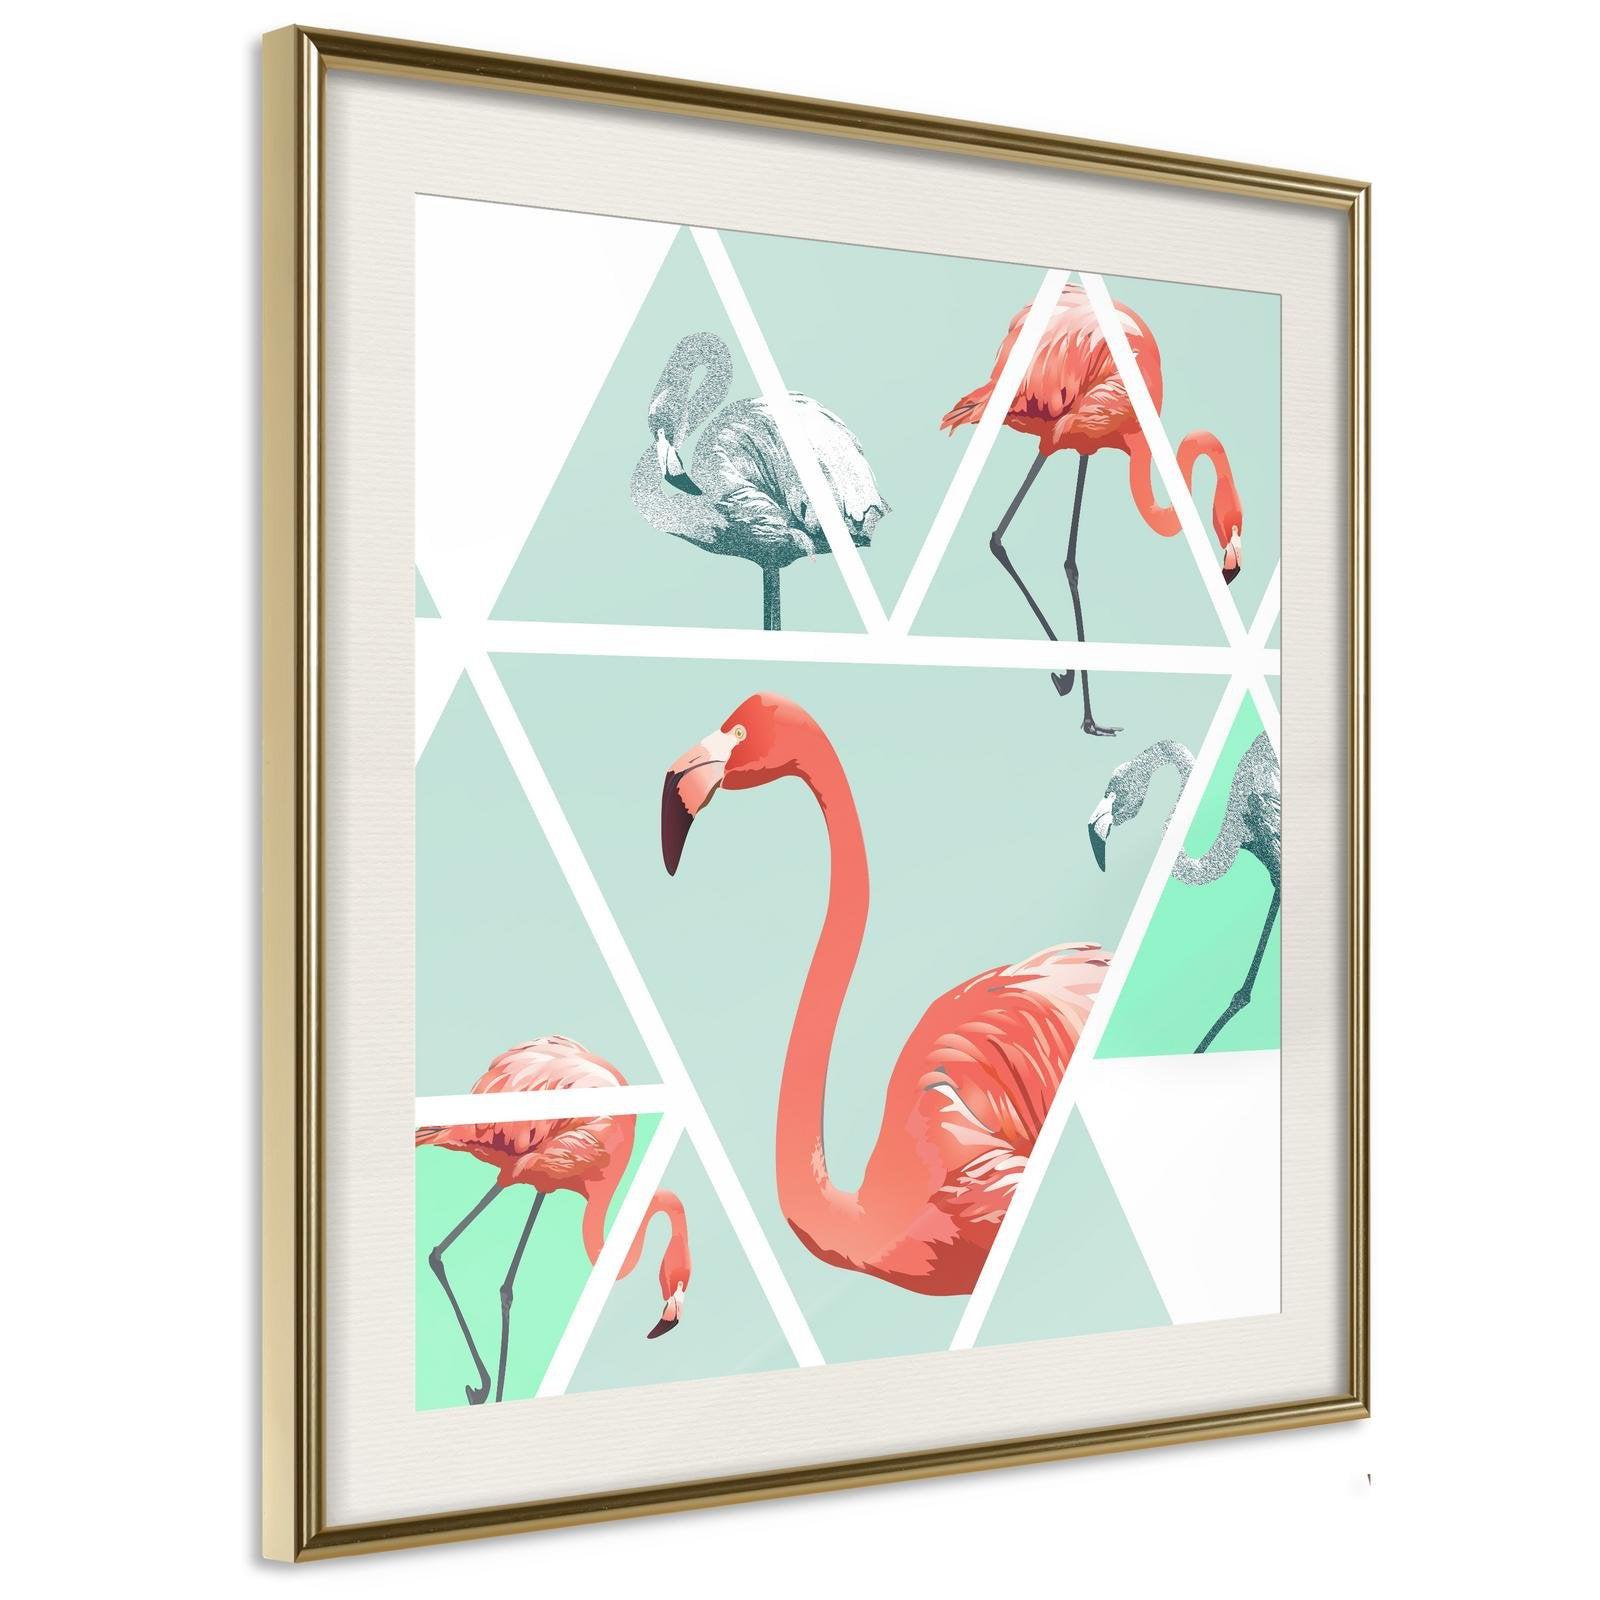 Inramad Poster / Tavla - Tropical Mosaic with Flamingos (Square)-Poster Inramad-Artgeist-20x20-Guldram med passepartout-peaceofhome.se